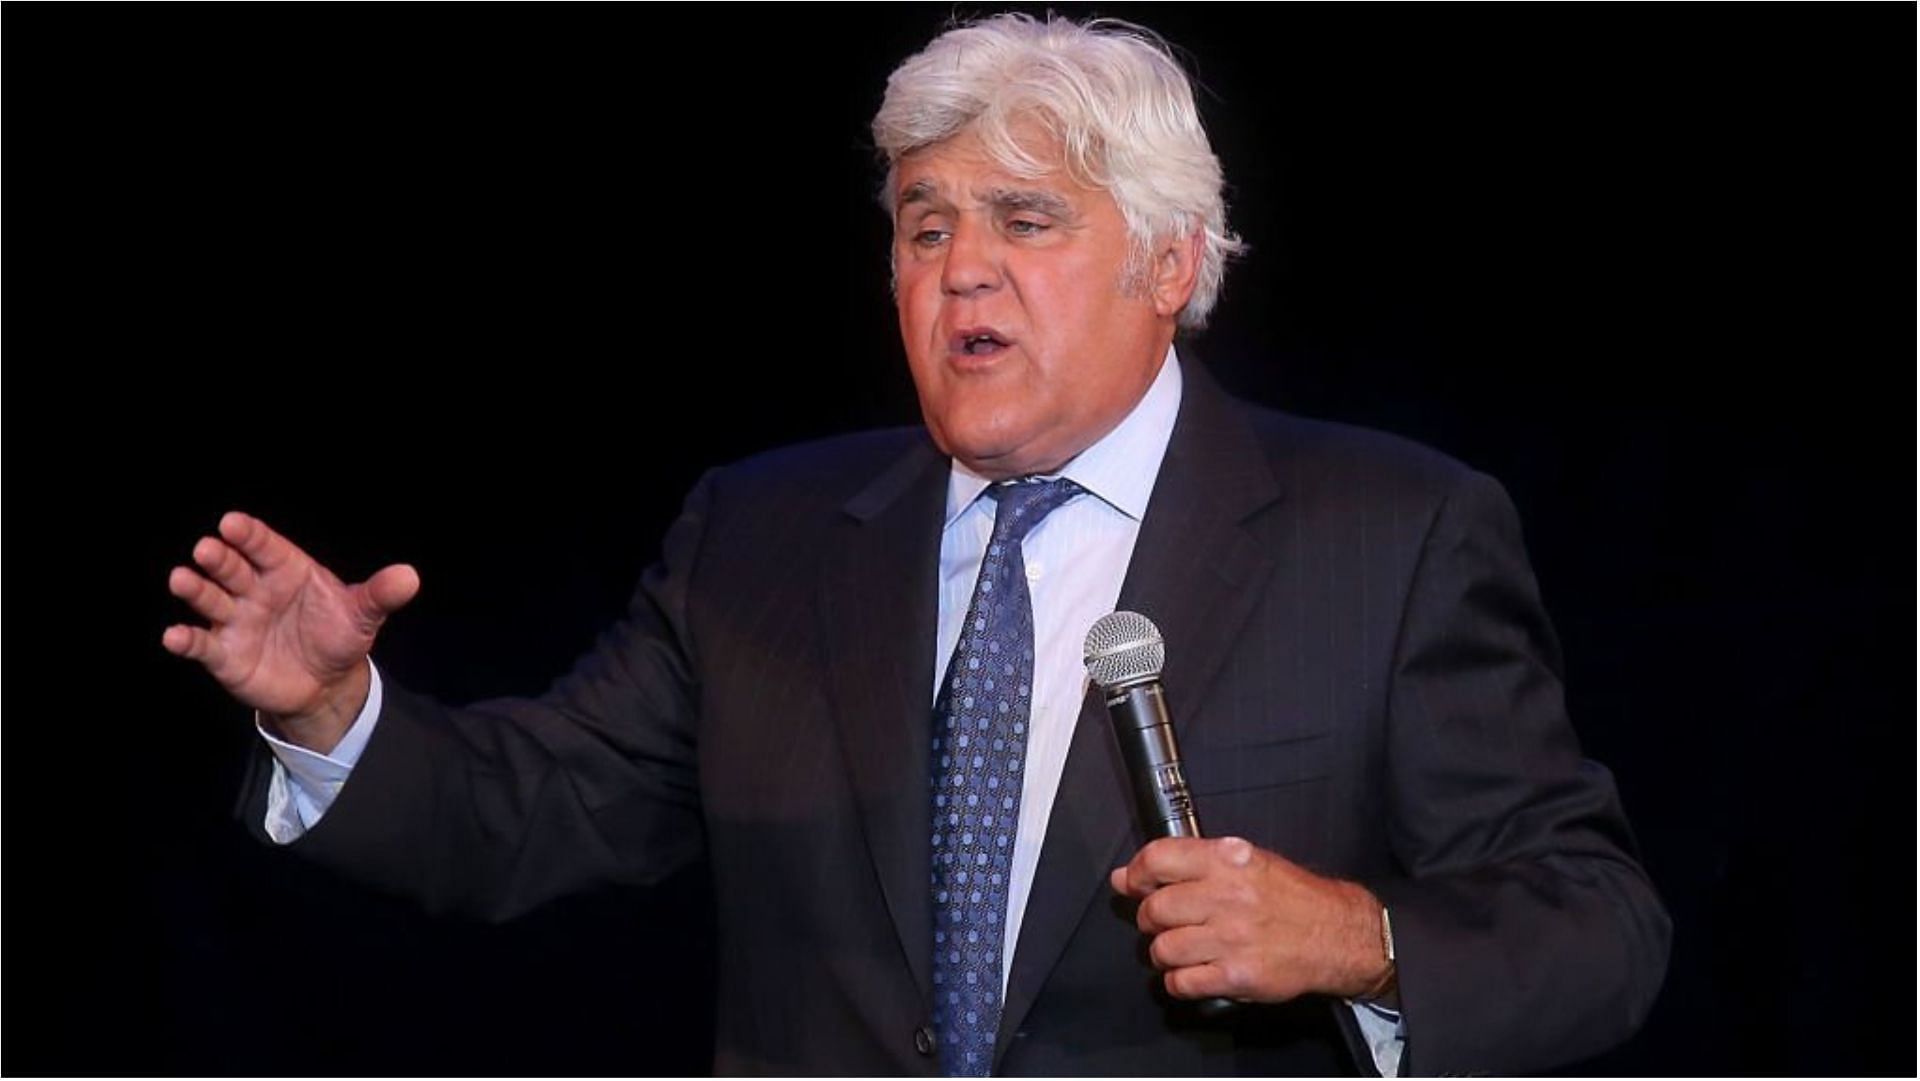 Jay Leno drove to the garage where he was injured (Image via Gary Miller/Getty Images)